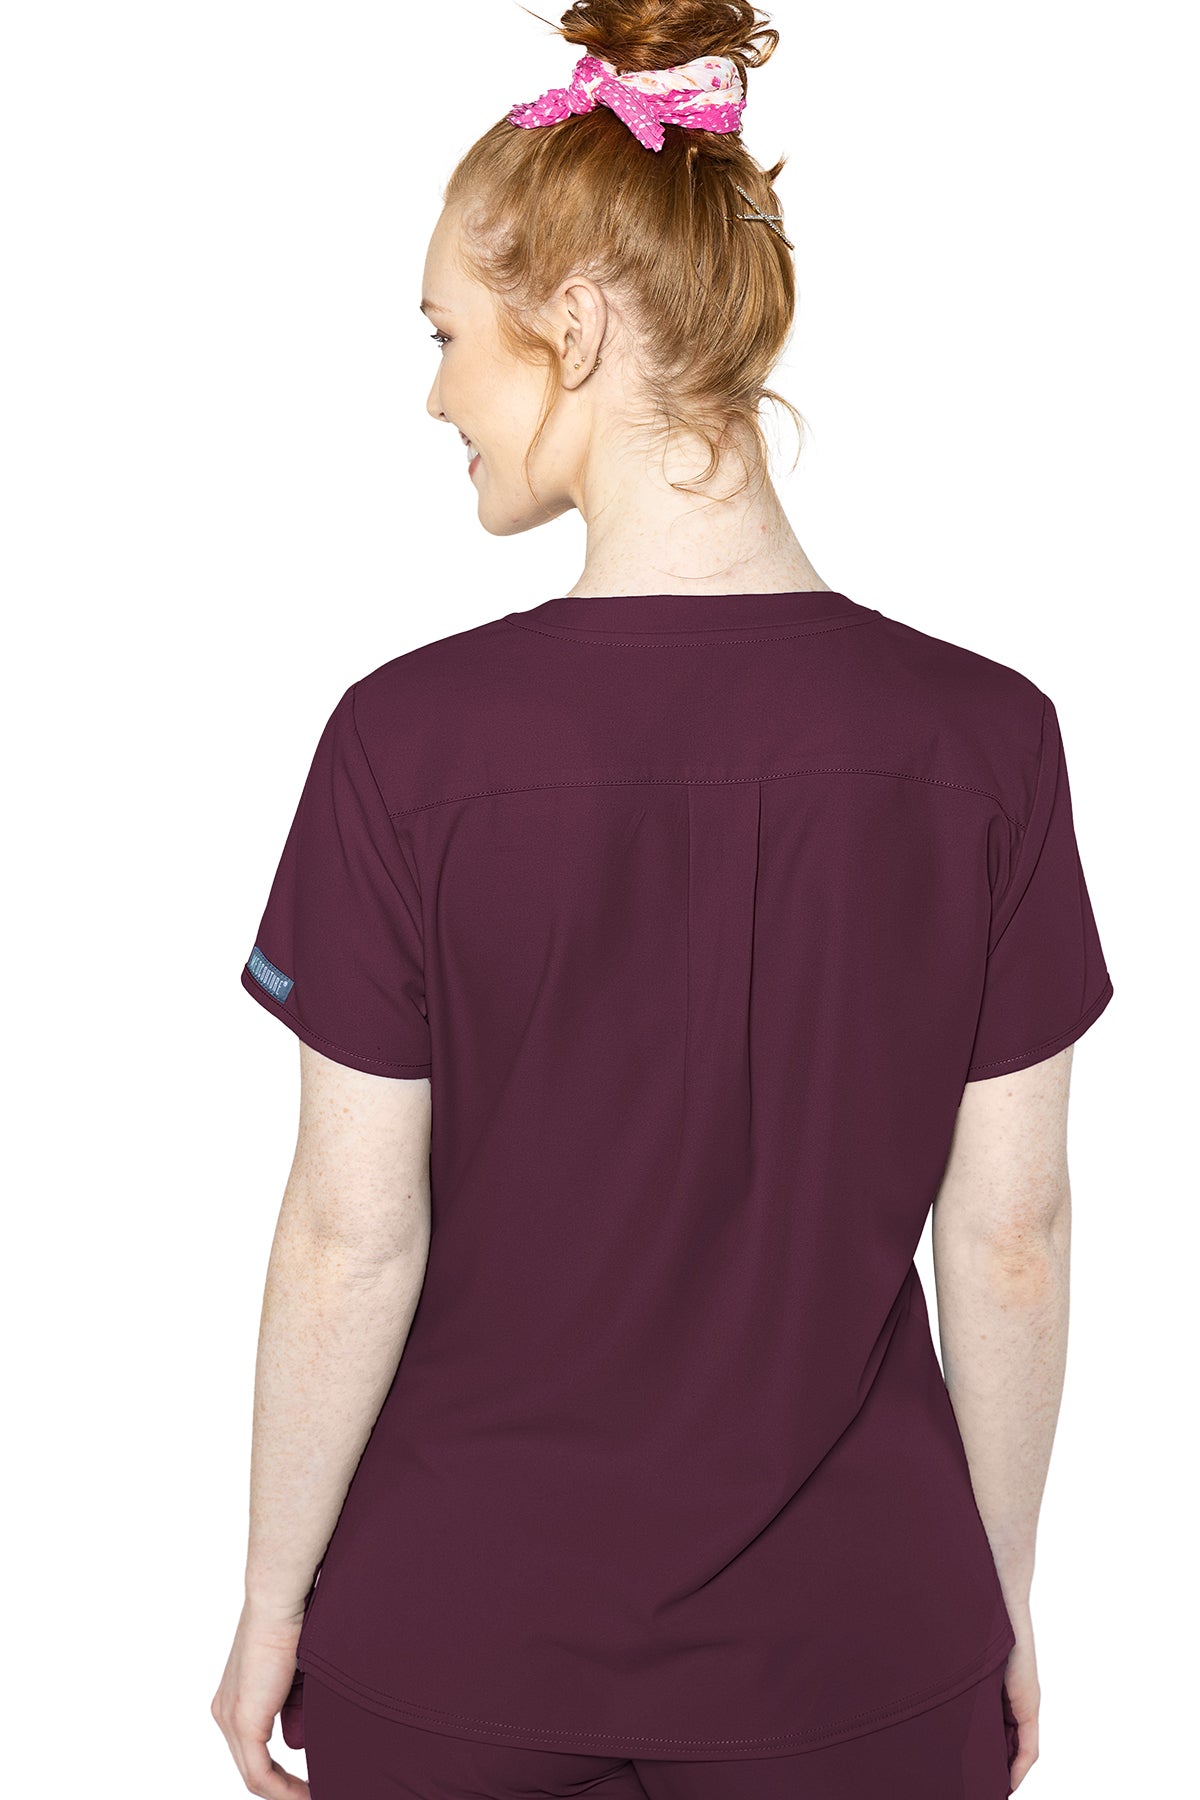 3 Pocket Top by Med Couture (Regular) XS-5XL / Wine